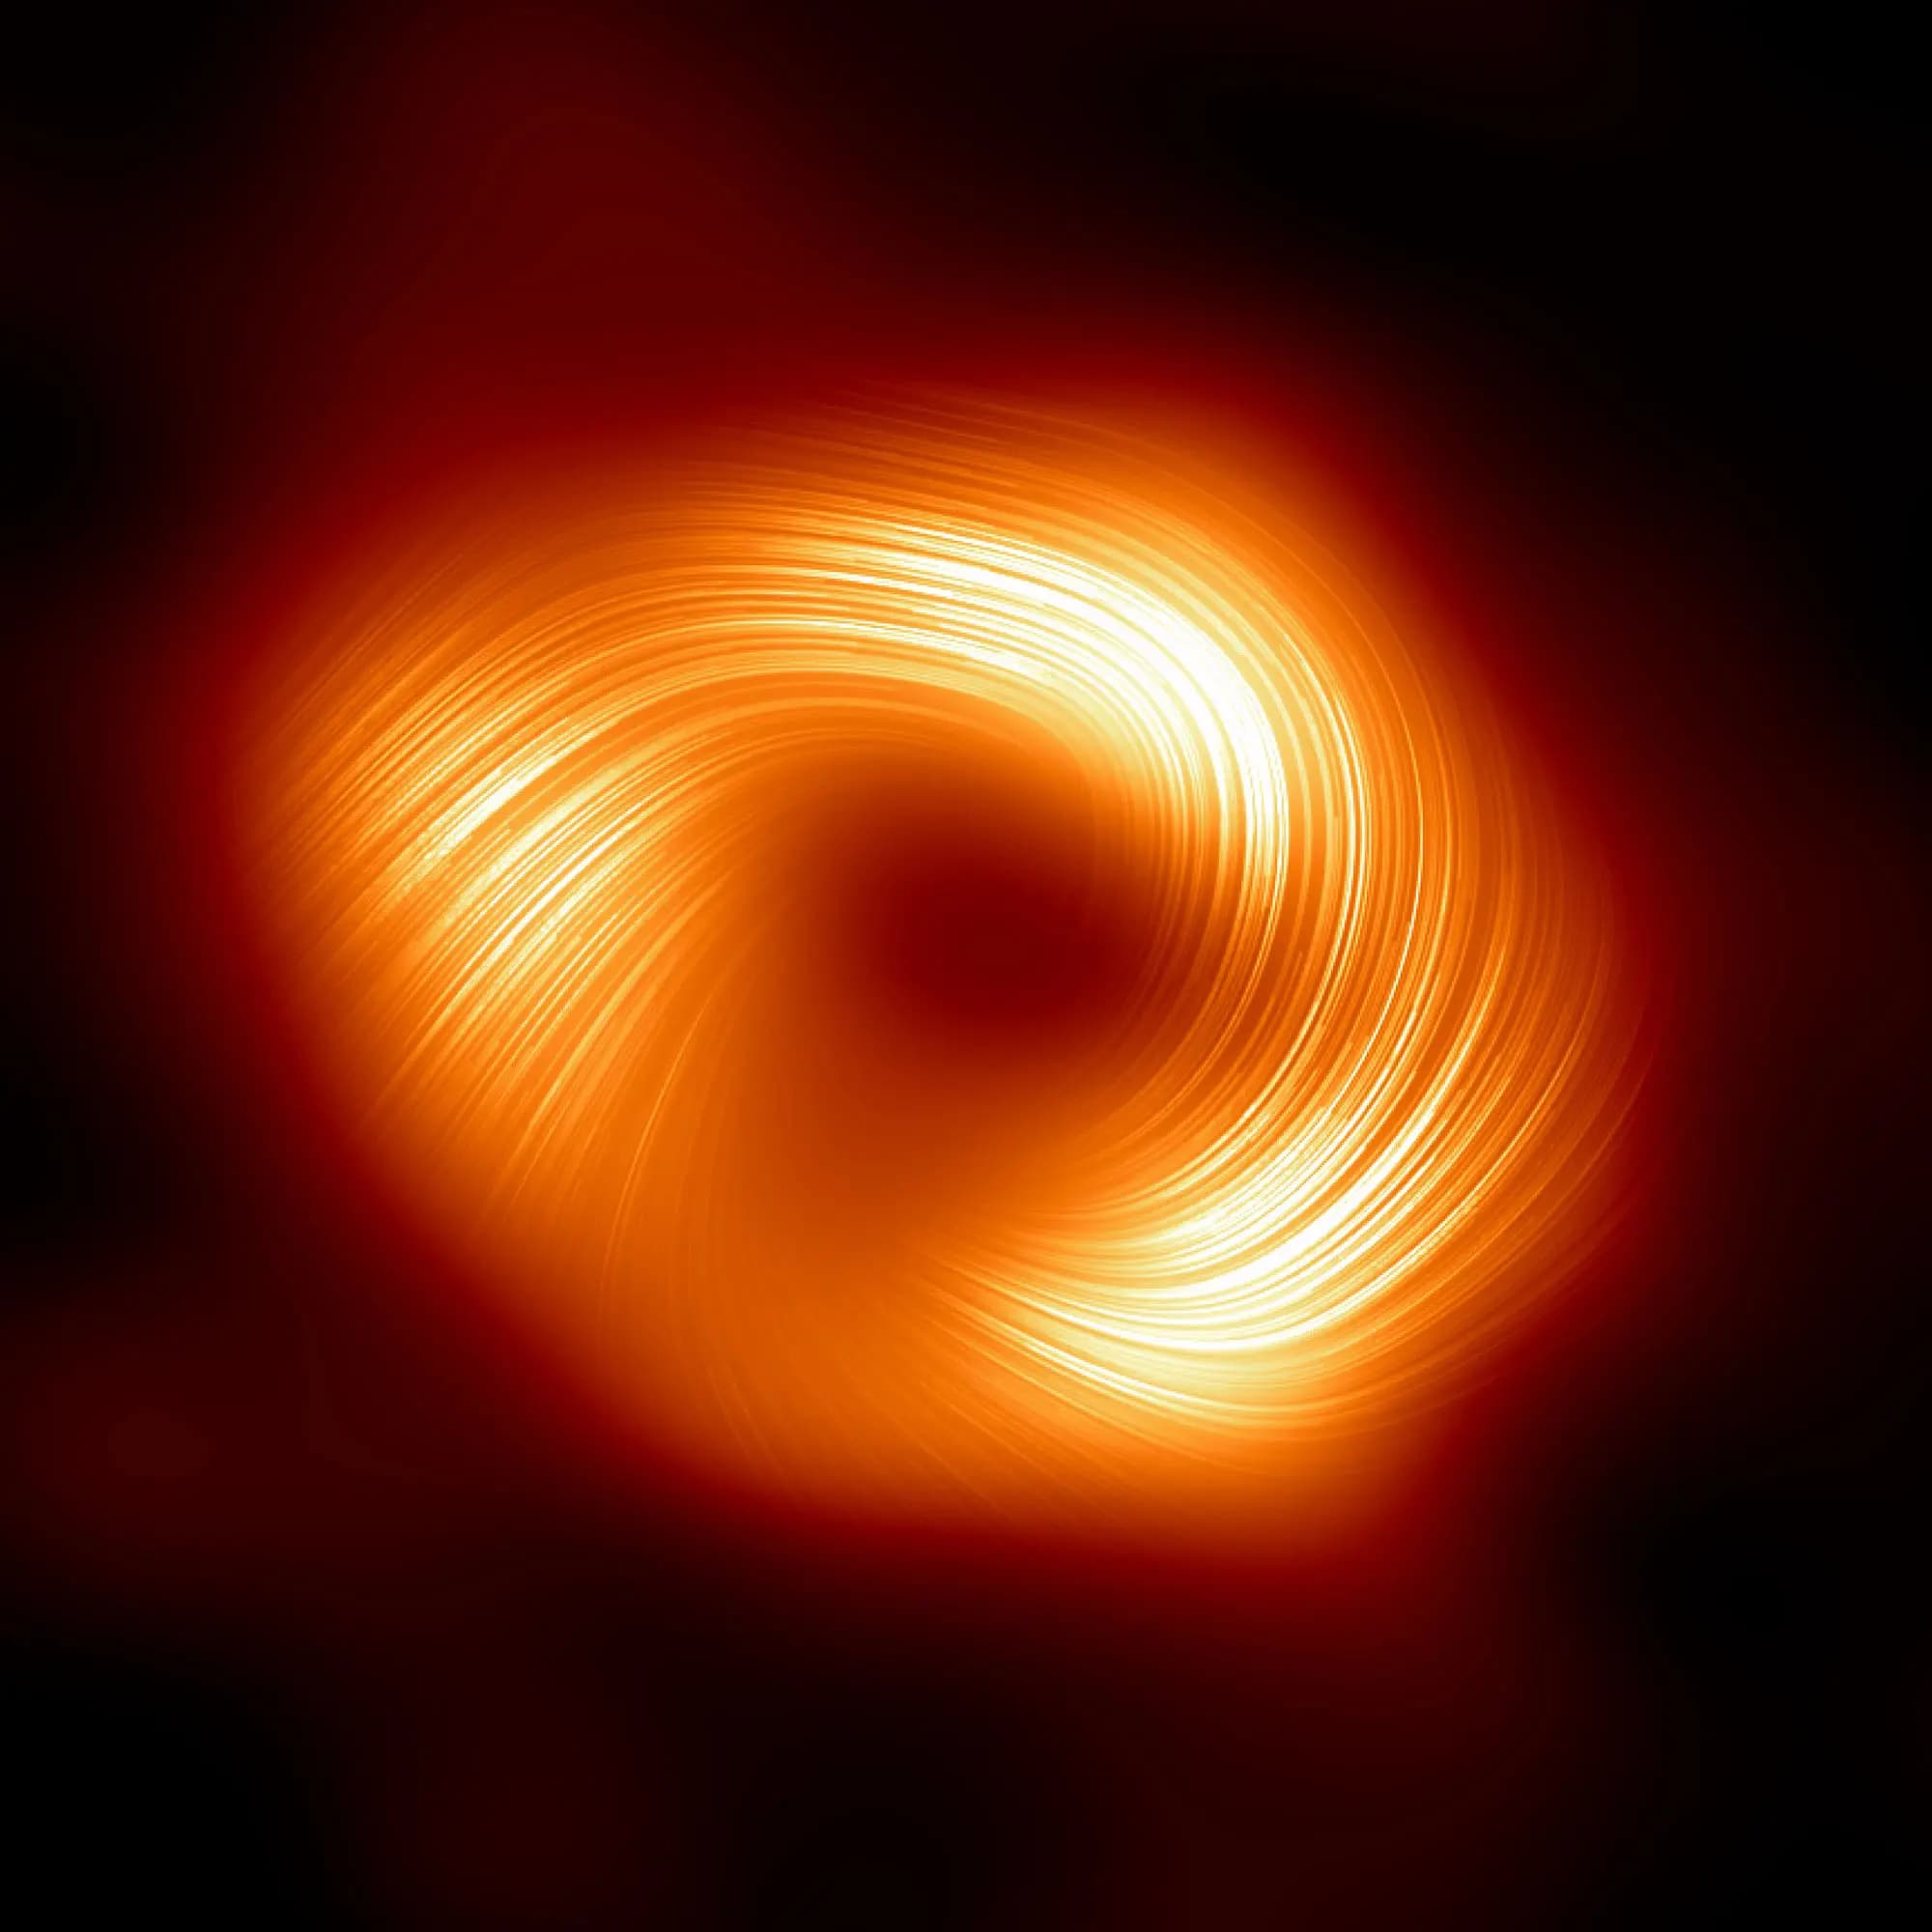 Strong magnetic fields spiraling at the edge of the Milky Way’s central black hole